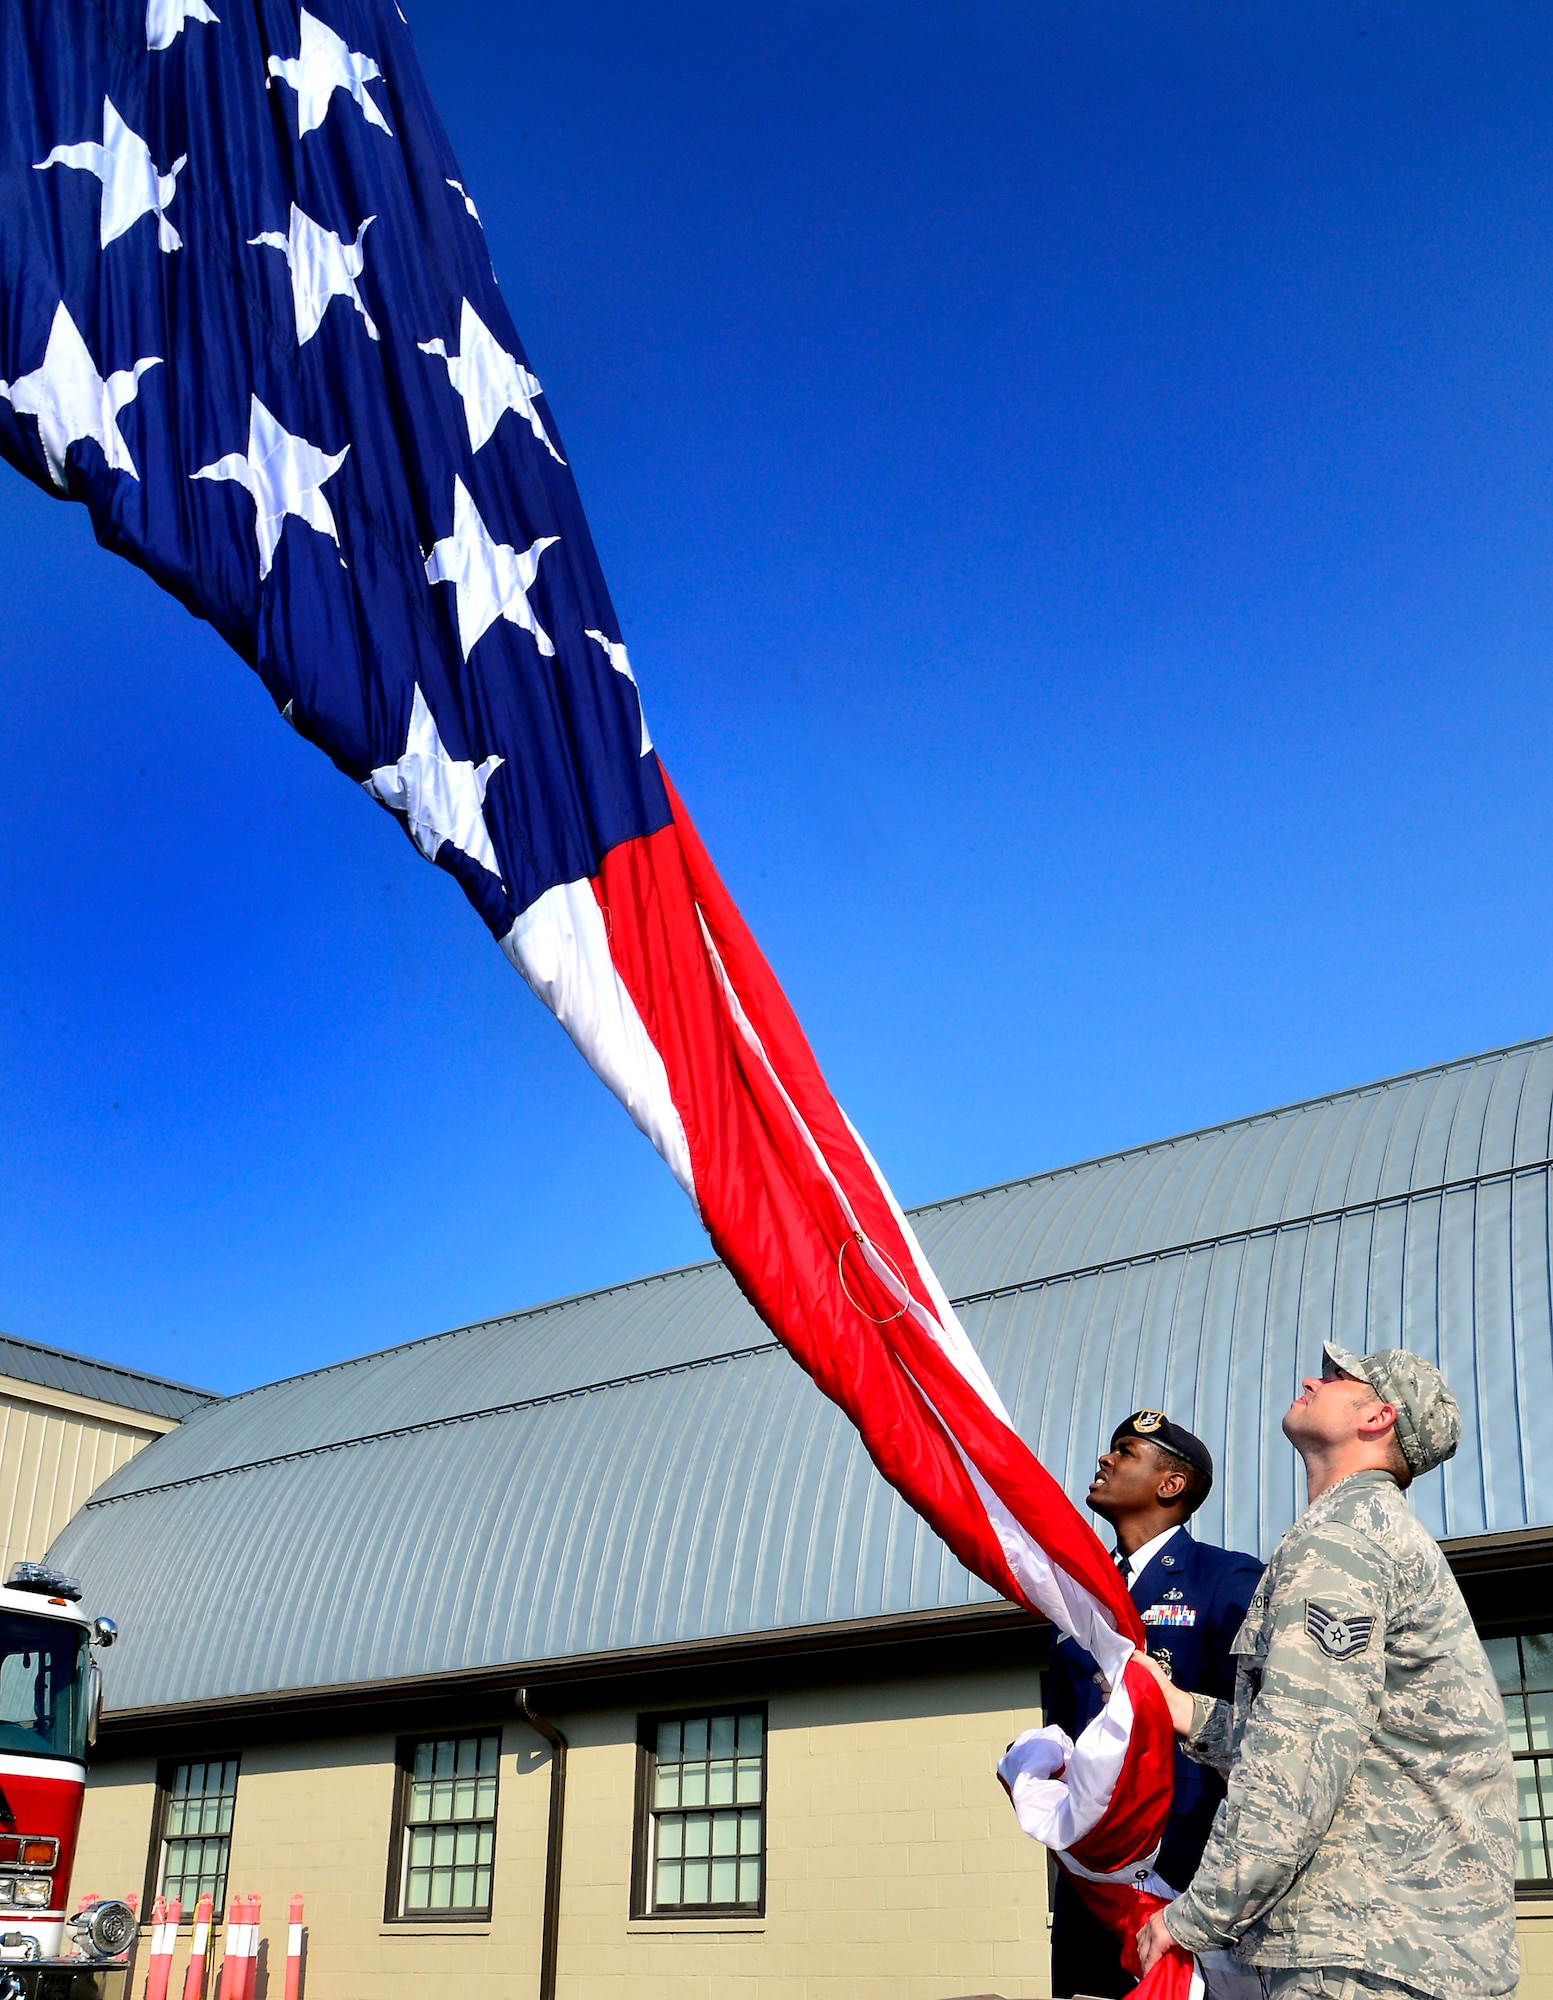 Staff Sgt. Christopher D. Houston, 436th Security Forces Squadron patrolman, and Staff Sgt. Matthew P. Varchetto, 436th Civil Engineering Squadron firefighter, raise the flag during the 9/11 Memorial dedication ceremony at the Air Mobility Command Museum, Dover Air Force Base, Del., Sept. 11, 2013. The memorial, which incorporates two pieces of steel from World Trade Center tower one, a rock from the United Airlines Flight 93 crash site and a block from the damaged portion of the Pentagon, was unveiled at the ceremony. (U.S. Air Force photo/David S. Tucker)